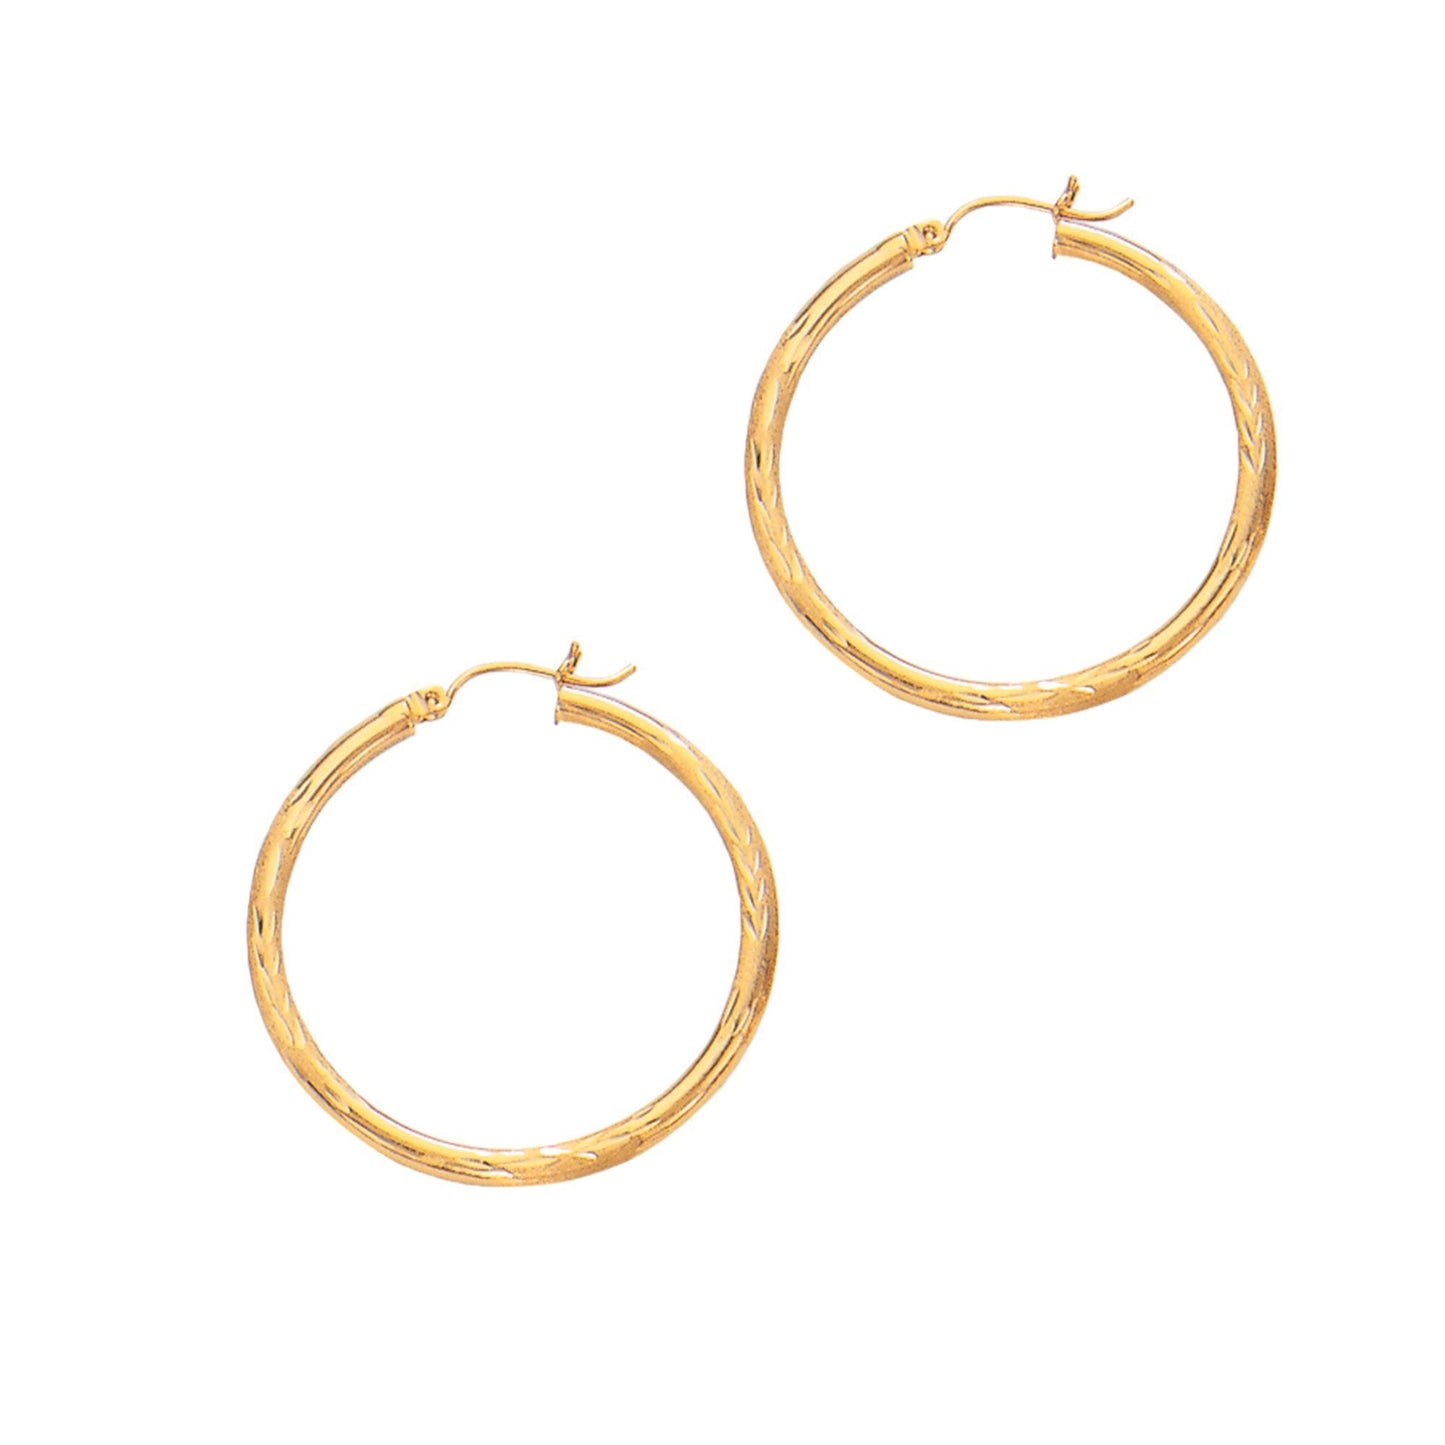 14Kt Yellow Gold 2X25mm Shiny Diamond Cut Round Tube Hoop Earring with Hinged Clasp